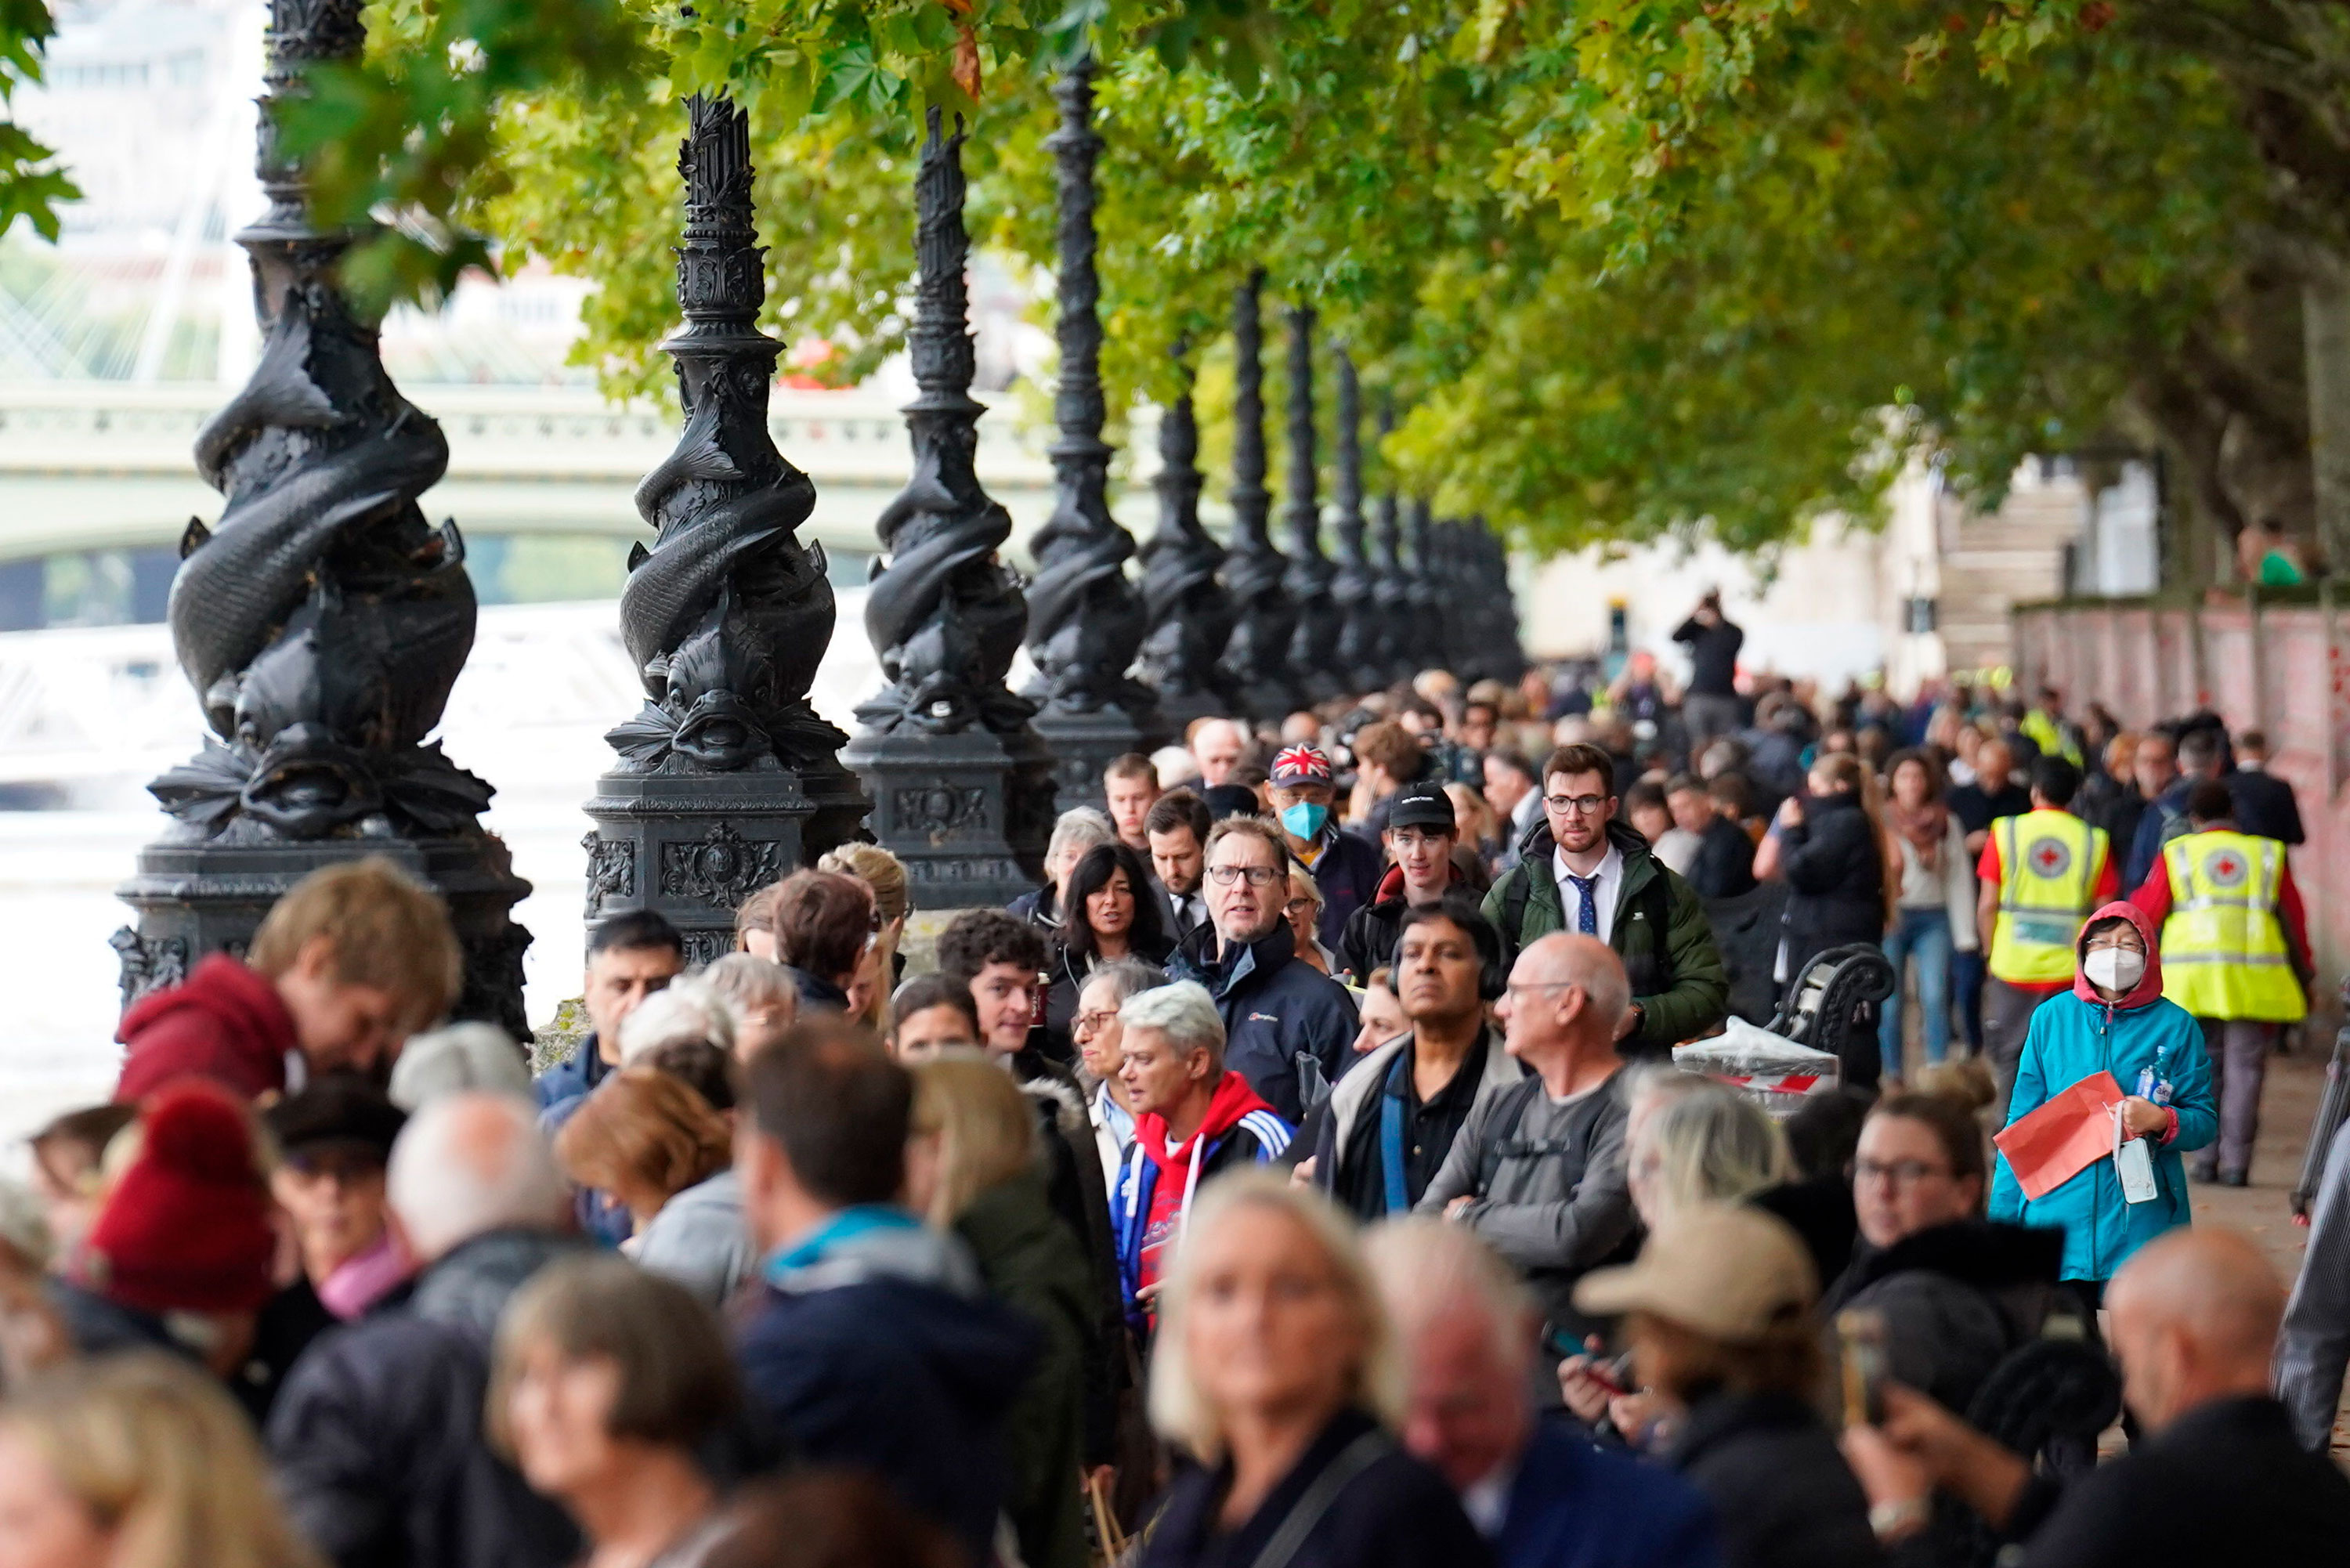 Members of the public queue on the South Bank as they wait to view Queen Elizabeth II lying in state.